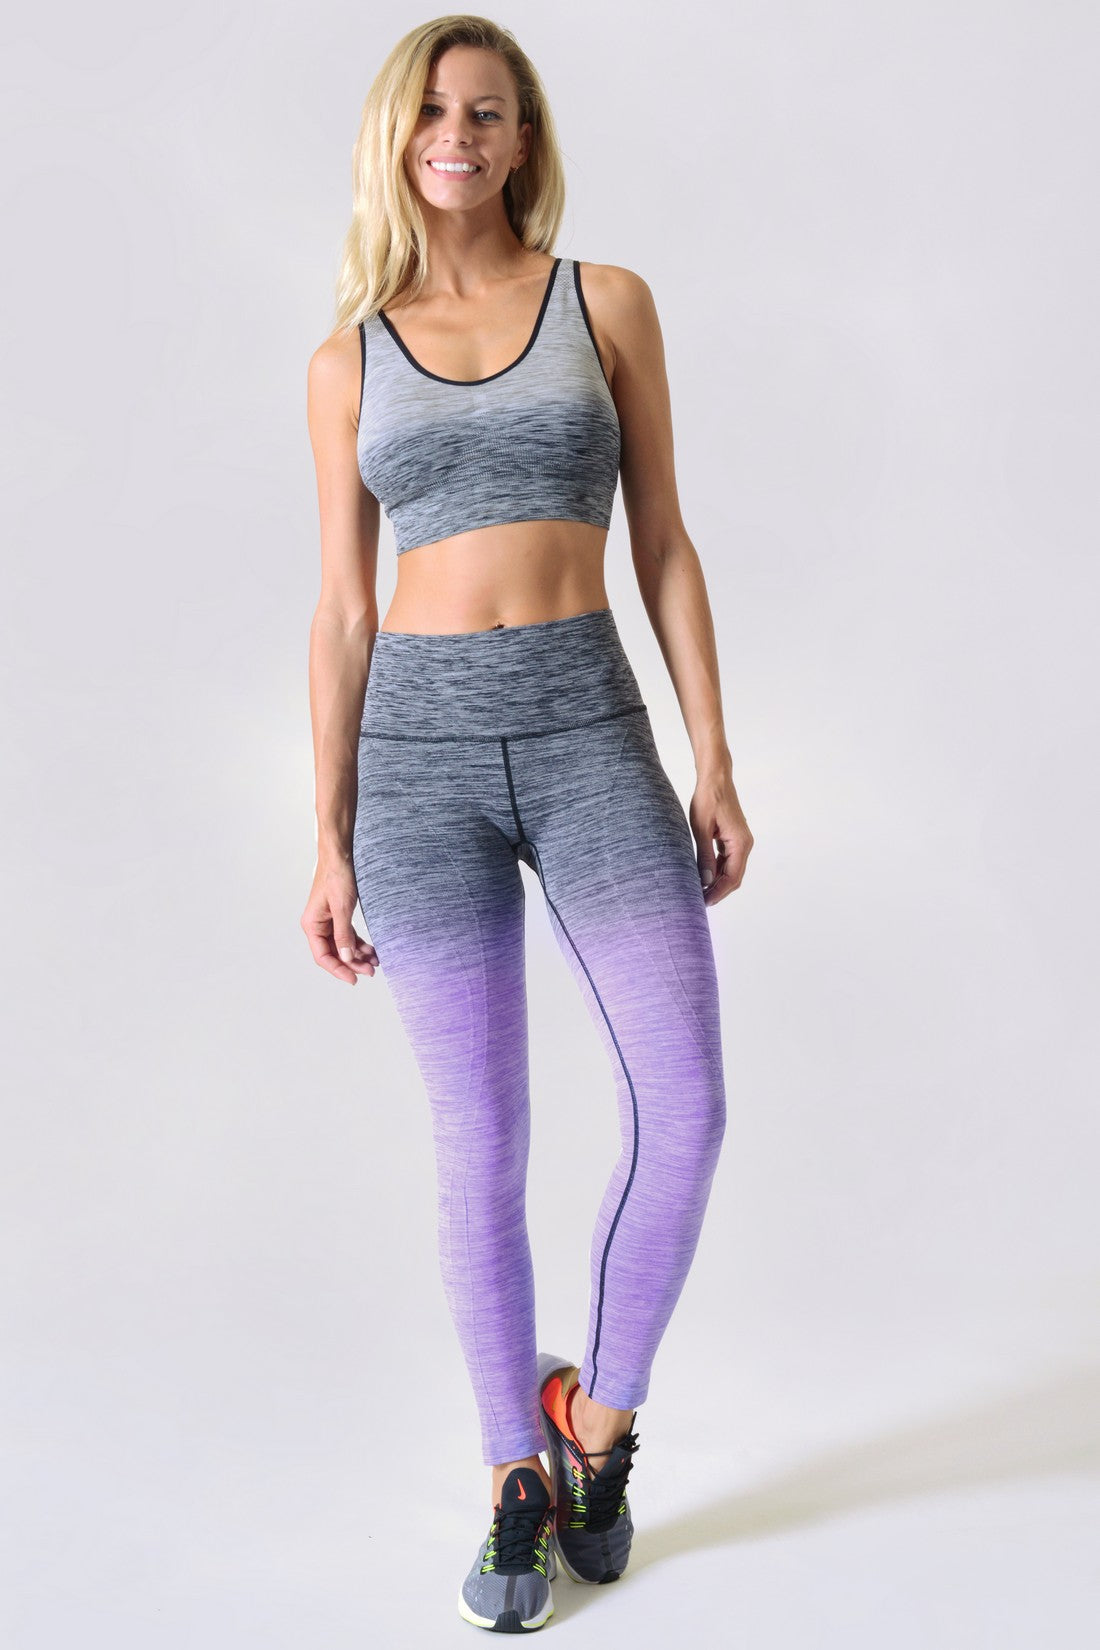 Grey To Purple Ombre Workout Leggings